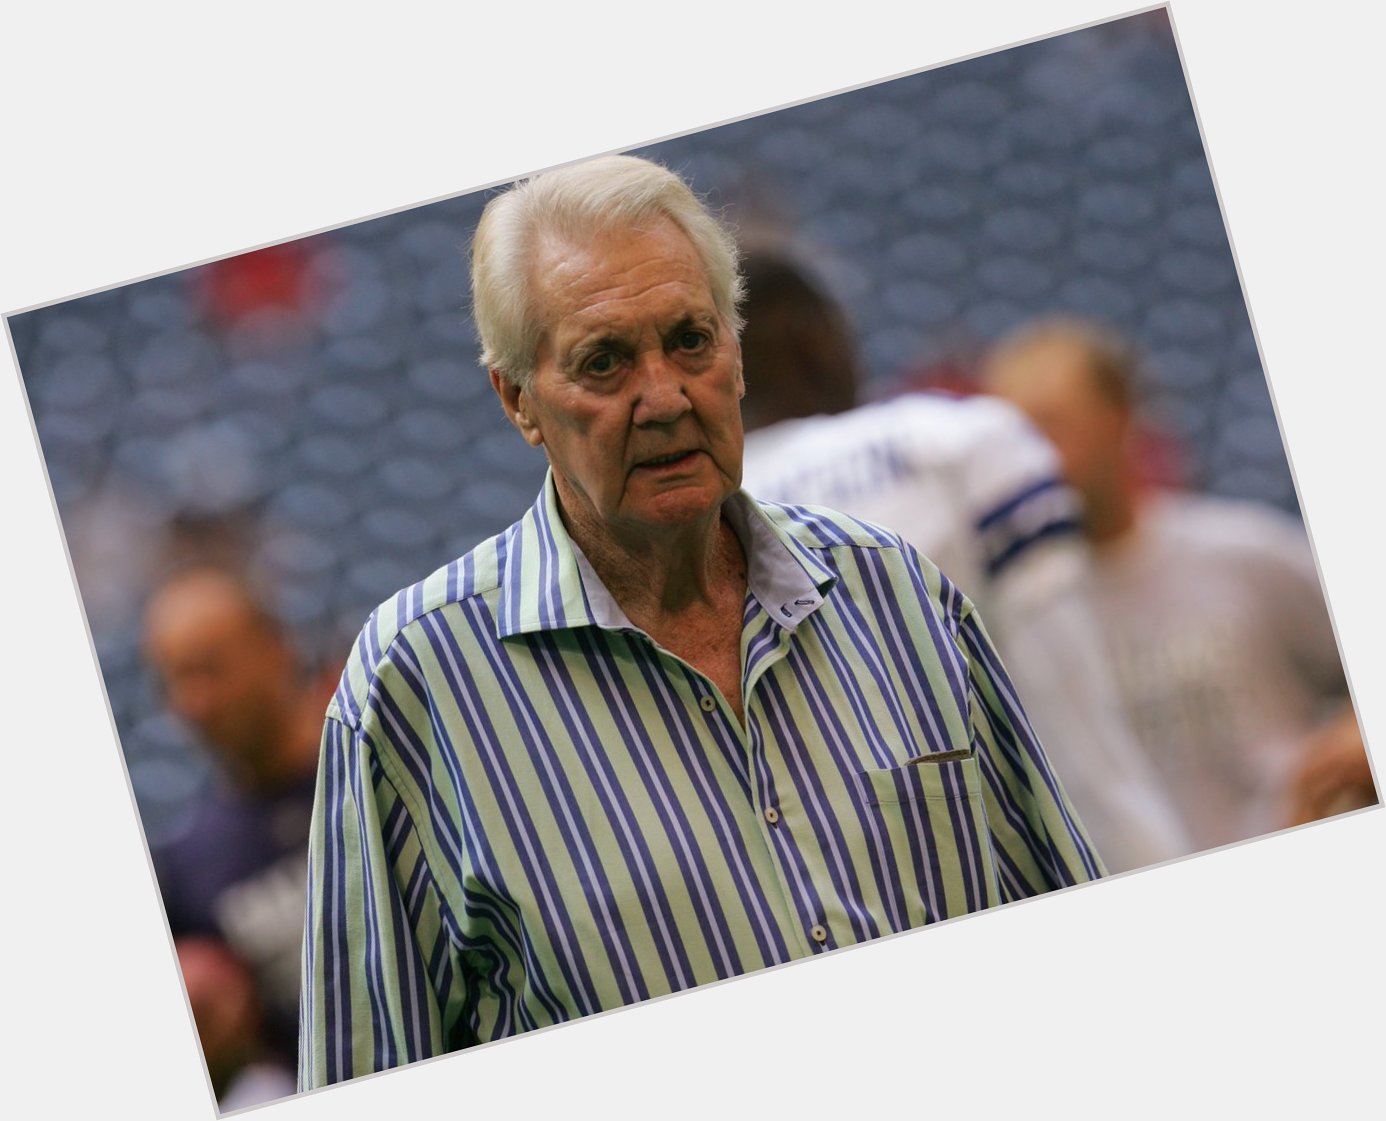 Happy birthday to the late Pat Summerall, who would have been 87 today! 